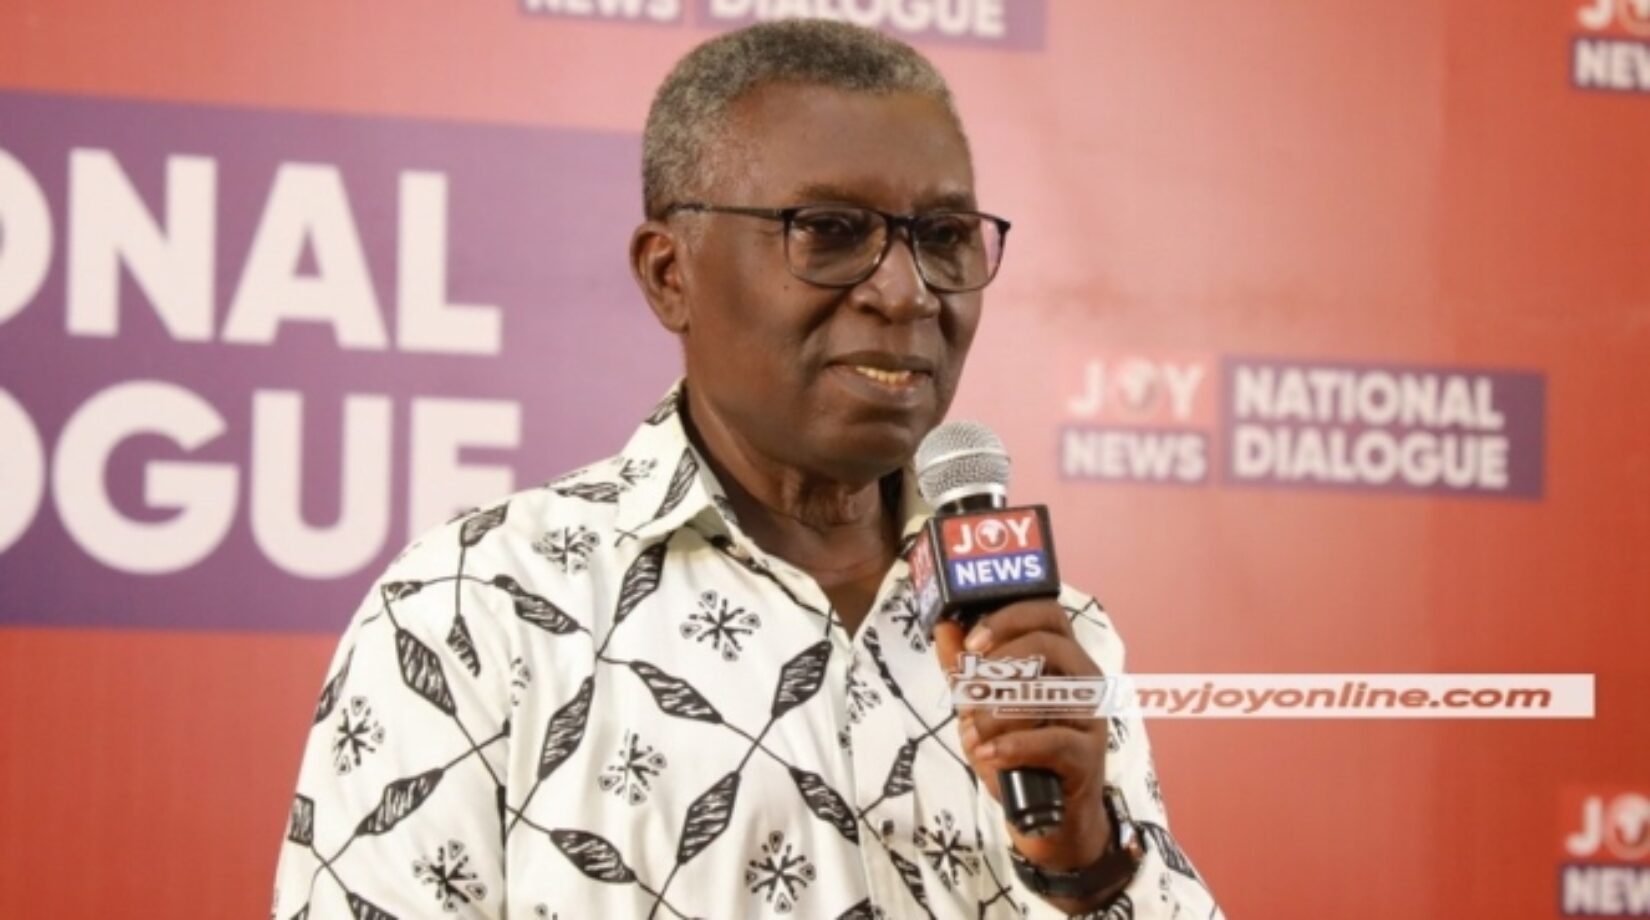 BEWARE! It’s dangerous to consume vegetables cultivated in illegal mining regions – Prof.Frimpong Boateng